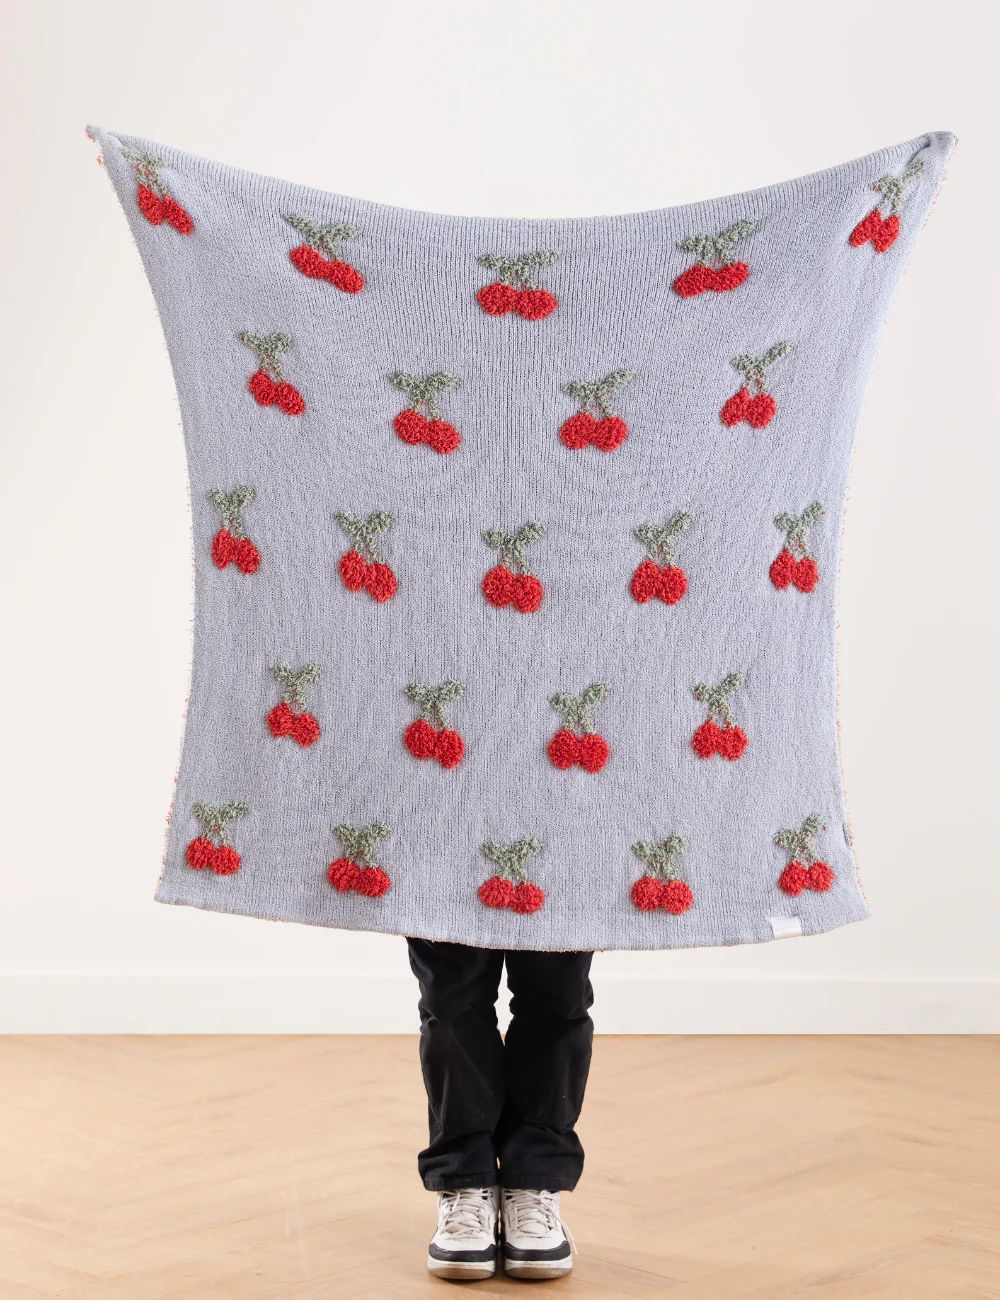 Cherries Buttery Blanket- Receiving Pre Order Feb 15th | The Styled Collection